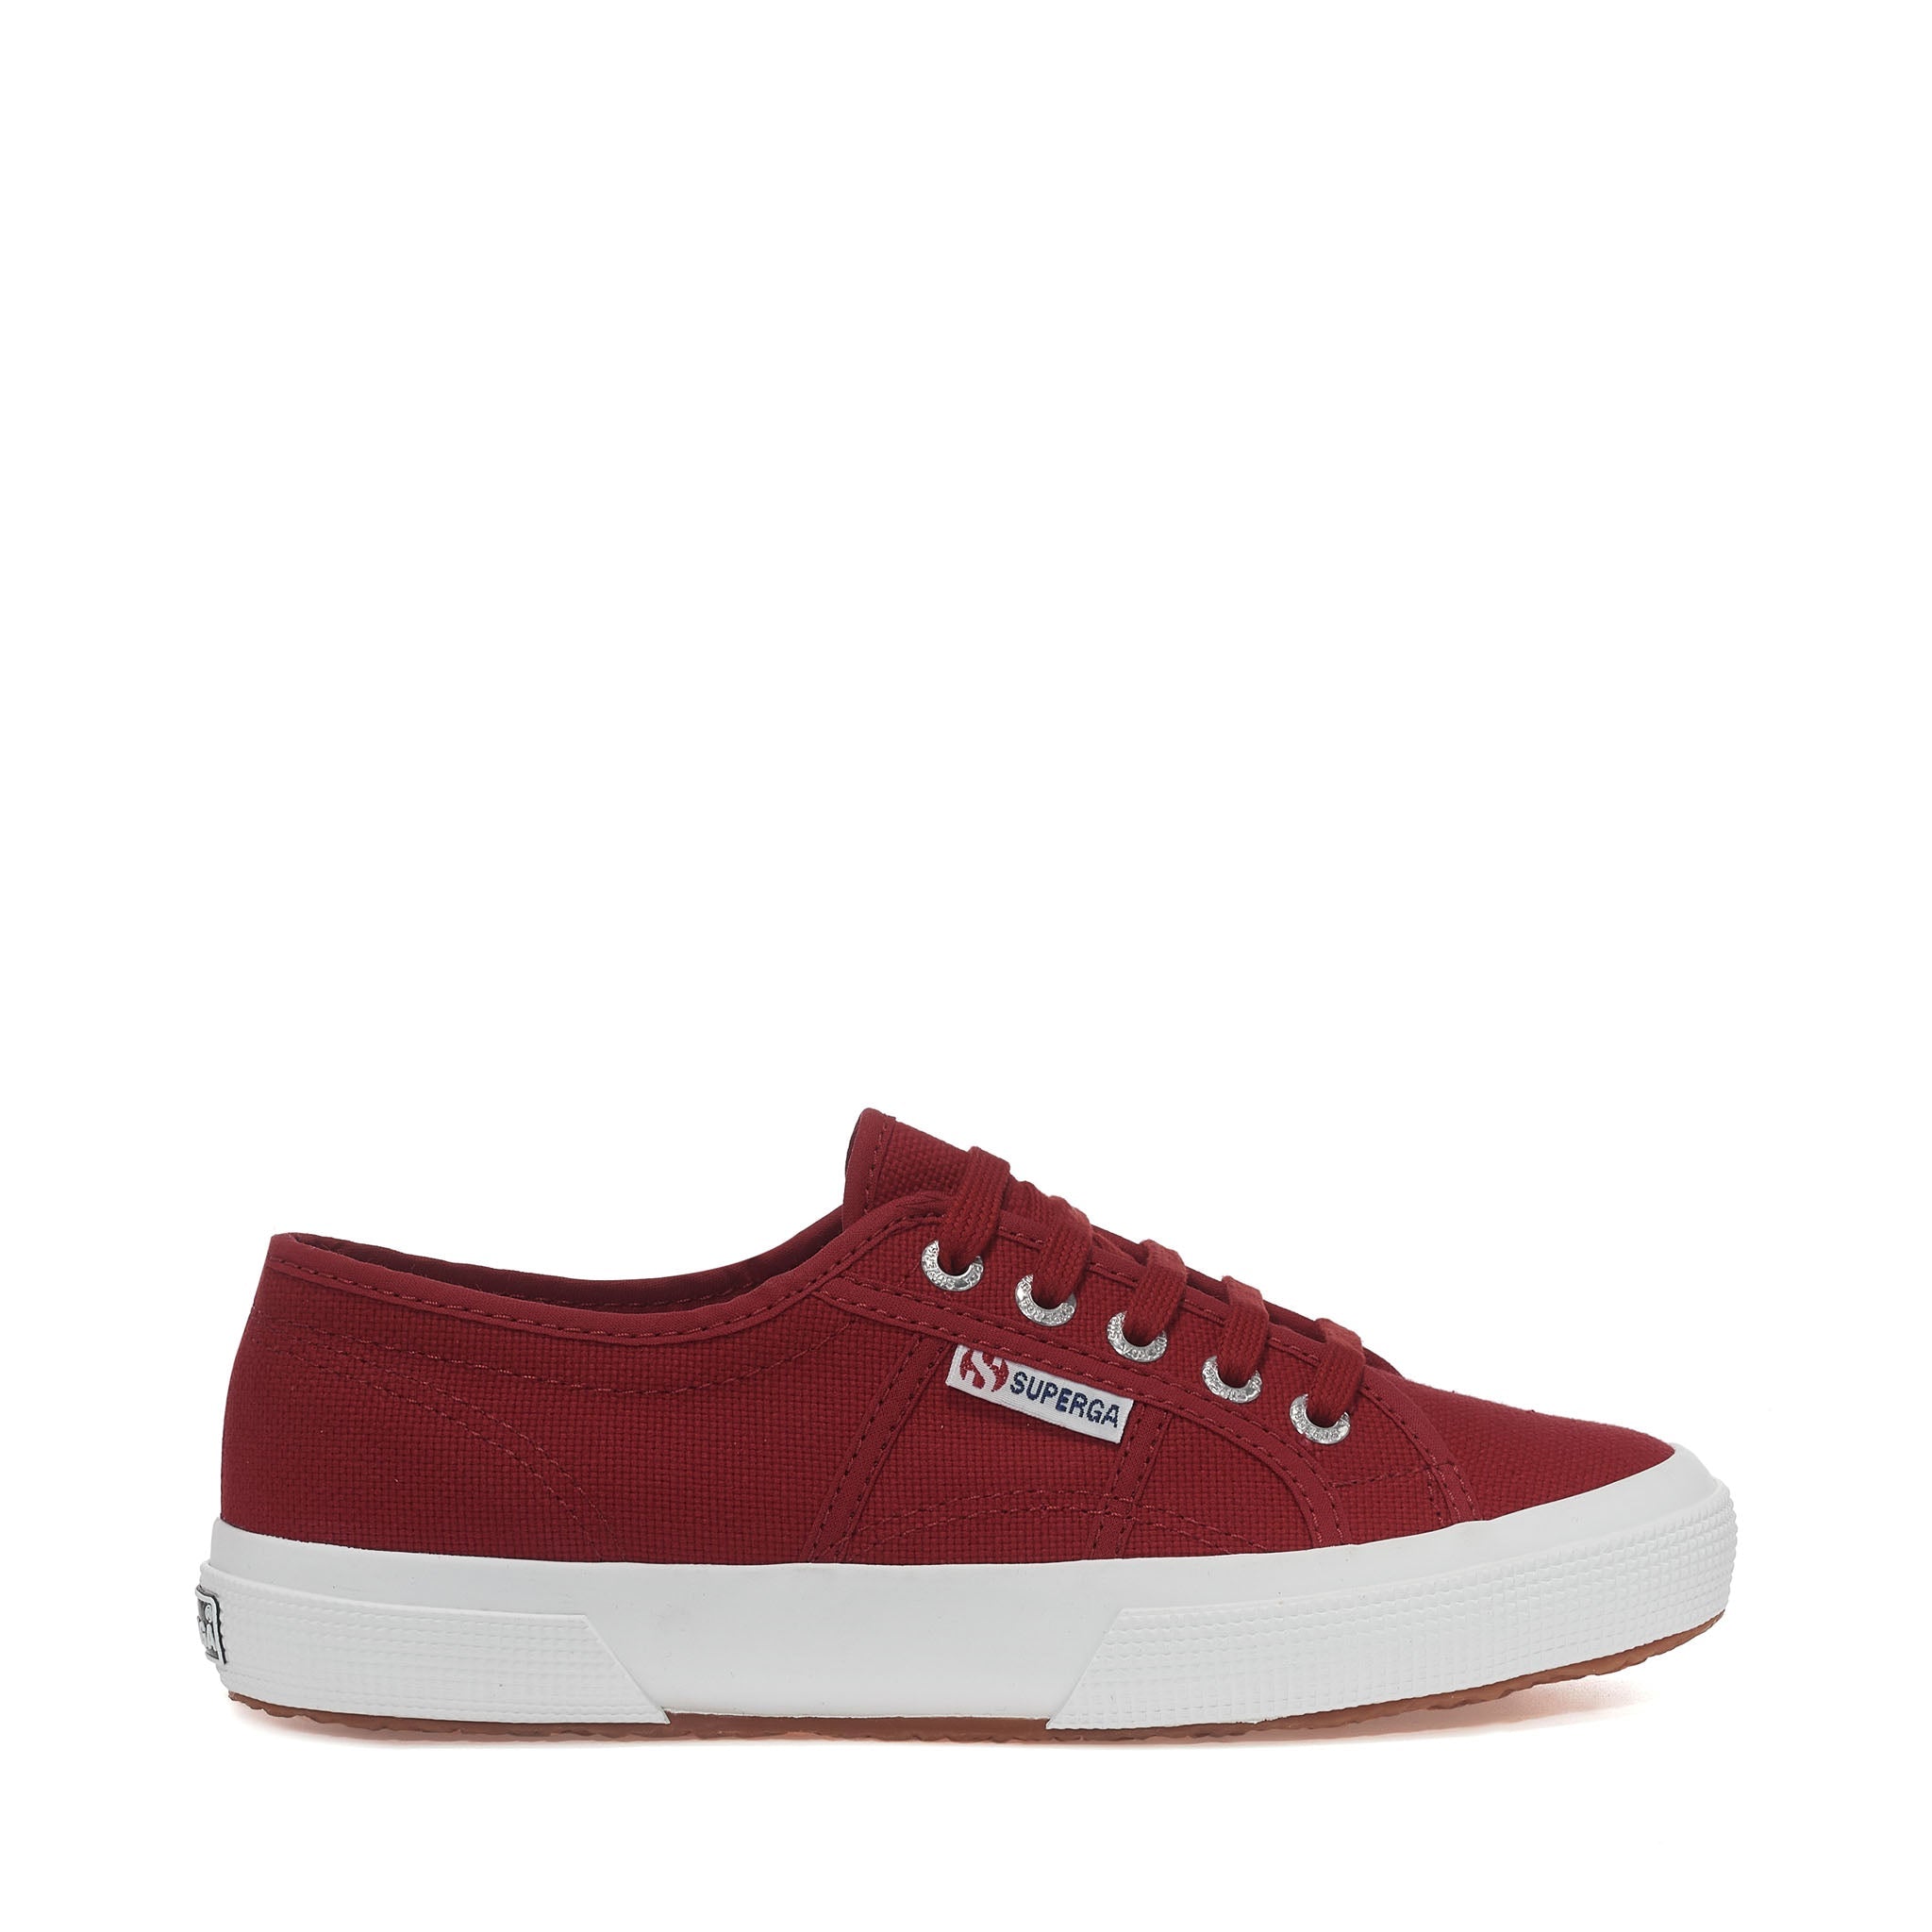 Superga 2750 Cotu Classic Sneakers - Red. Side view.